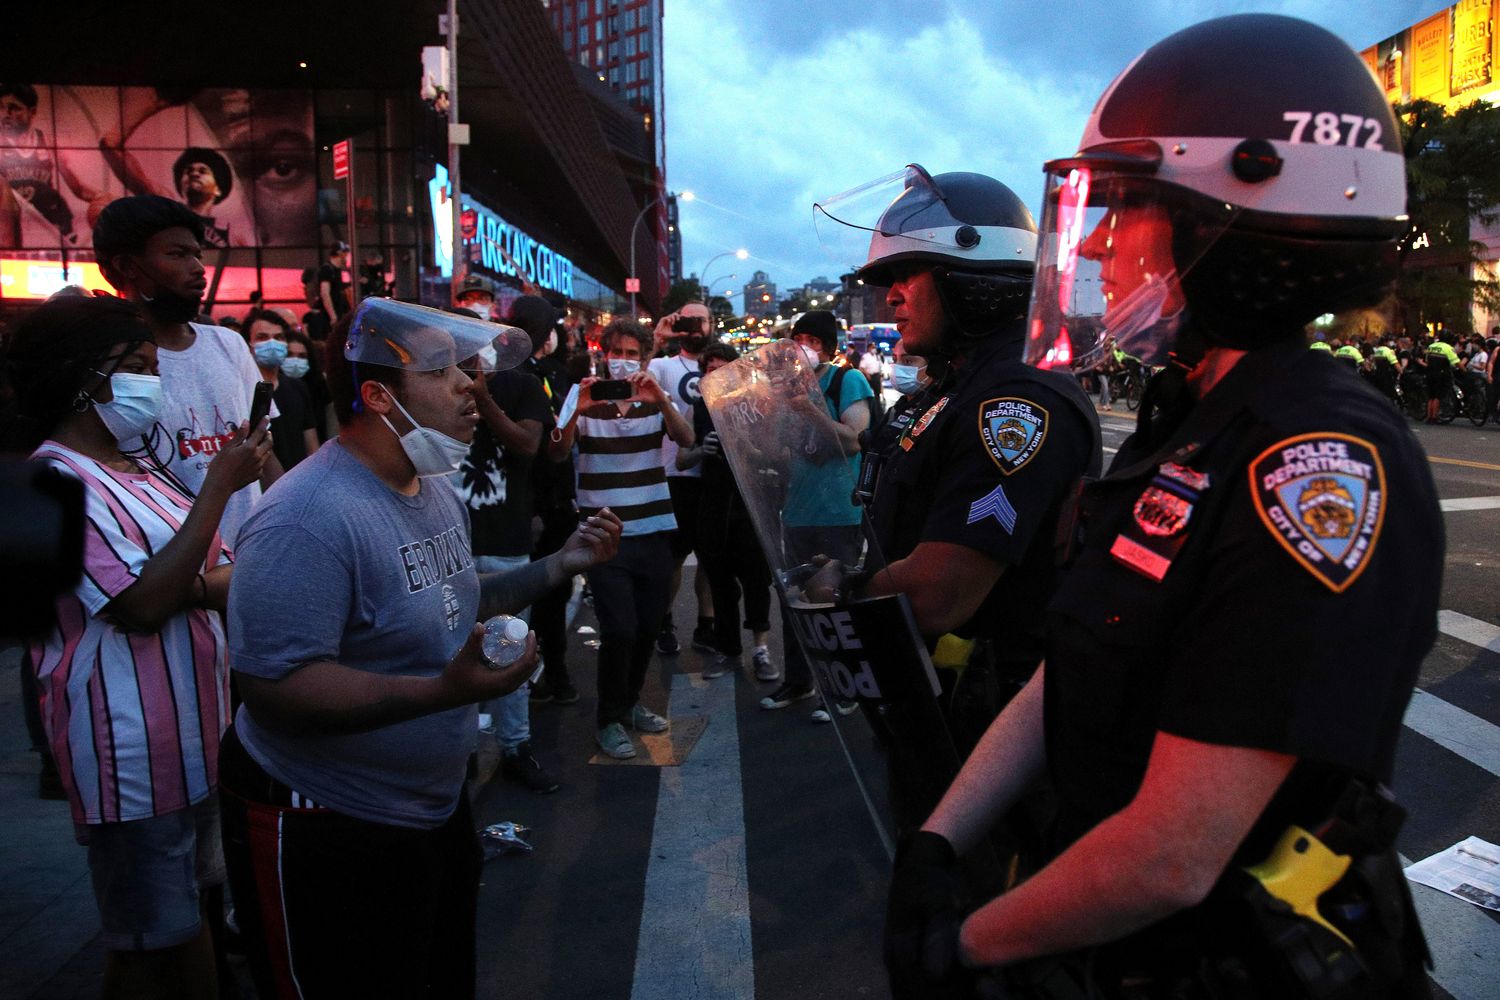 Individuals agree on police reforms which have divided Washington, new ballot exhibits